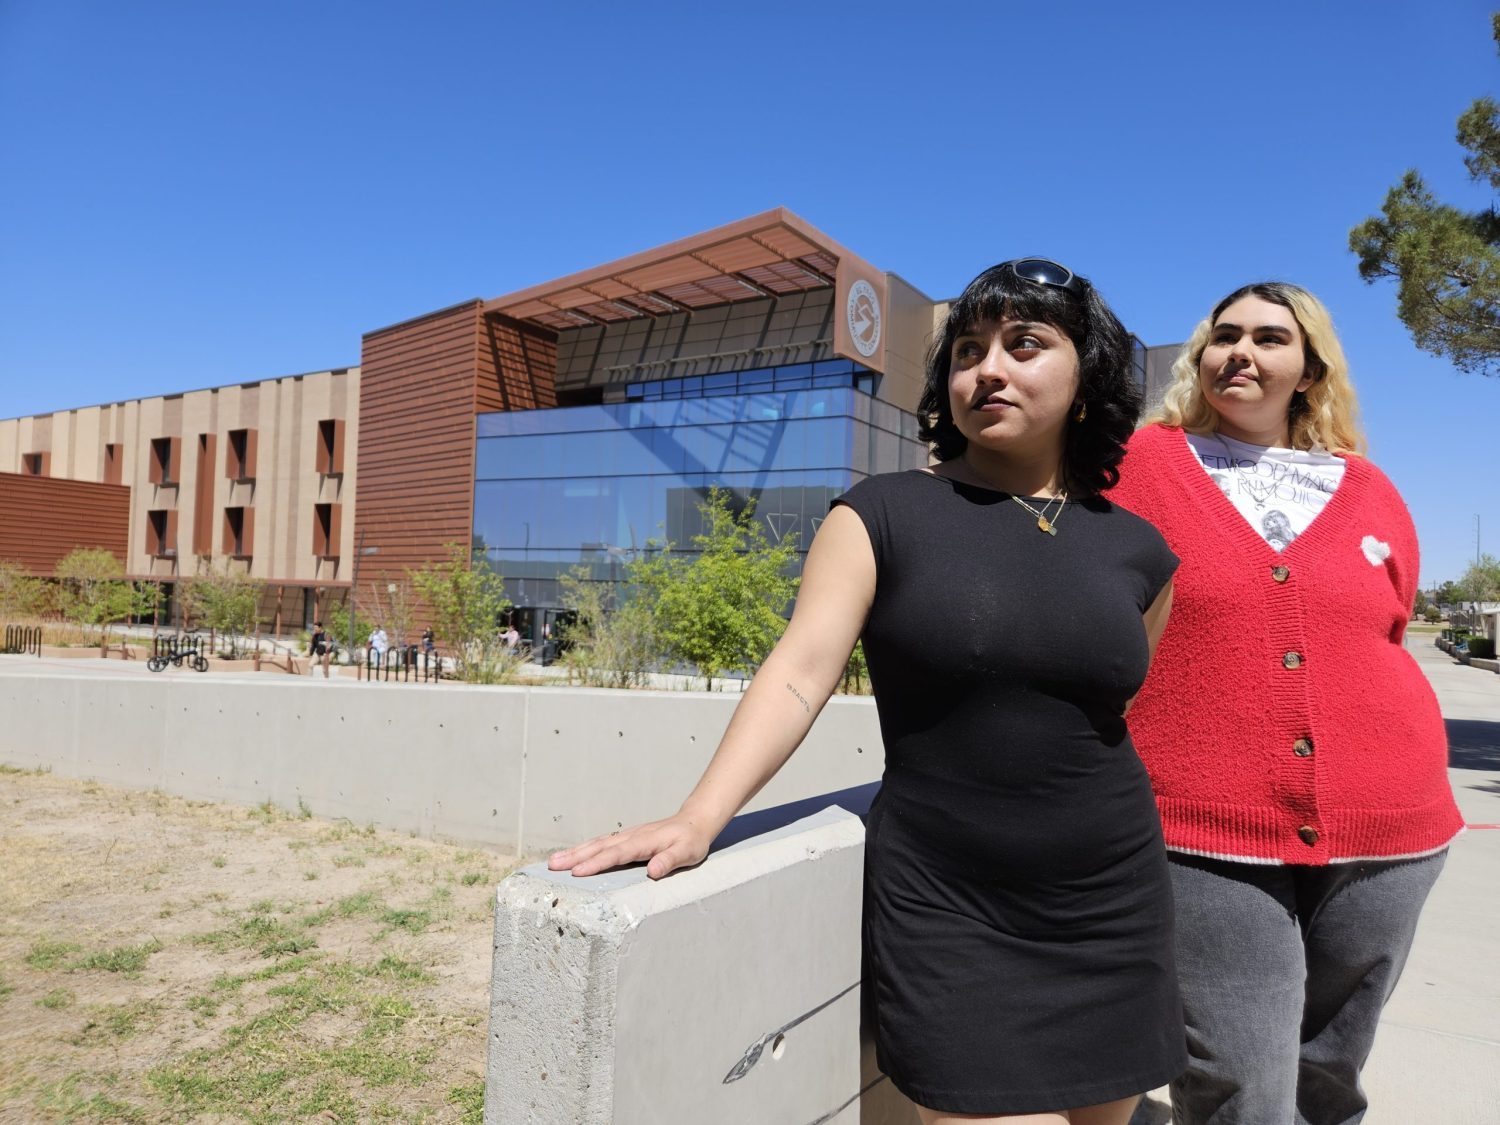 EPCC initiative engages young adult voters, offers election poll work experience